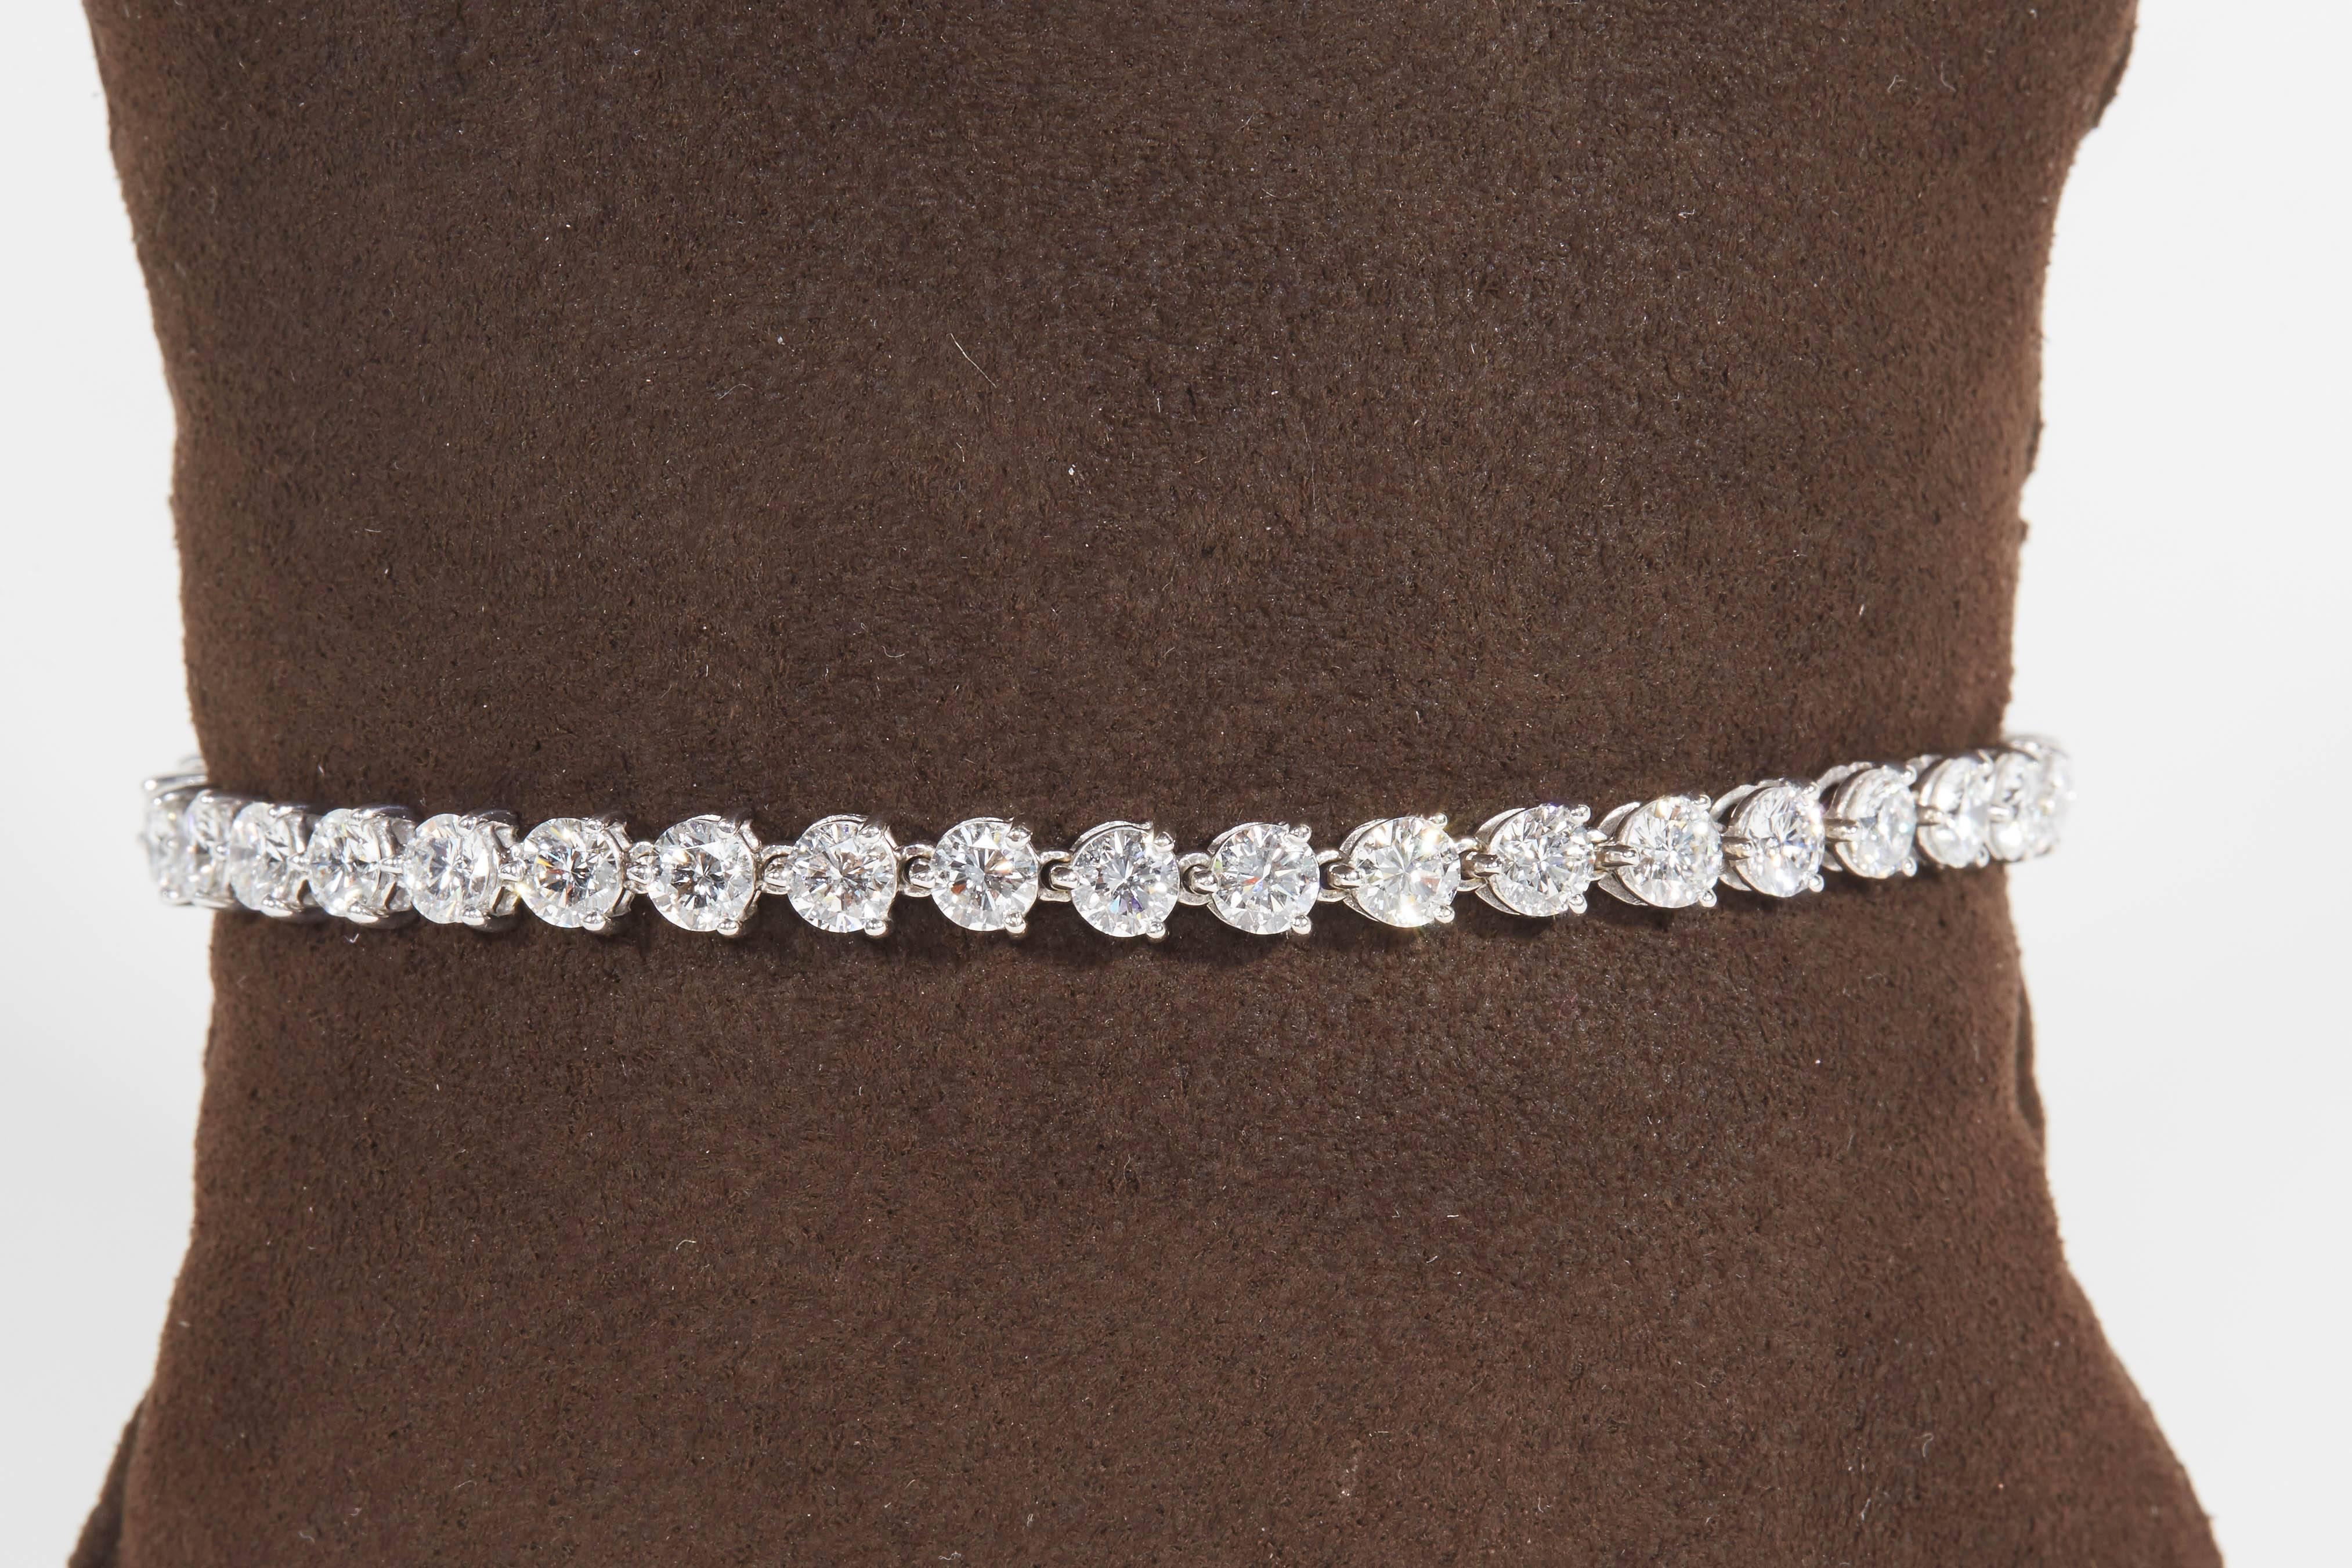 
A beautiful diamond tennis bracelet made with high quality round brilliant cut diamonds. 

This three prong bracelet was made to maximize diamond brilliance, a minimal amount of metal is used in this design. All you see are round diamonds!

8.21